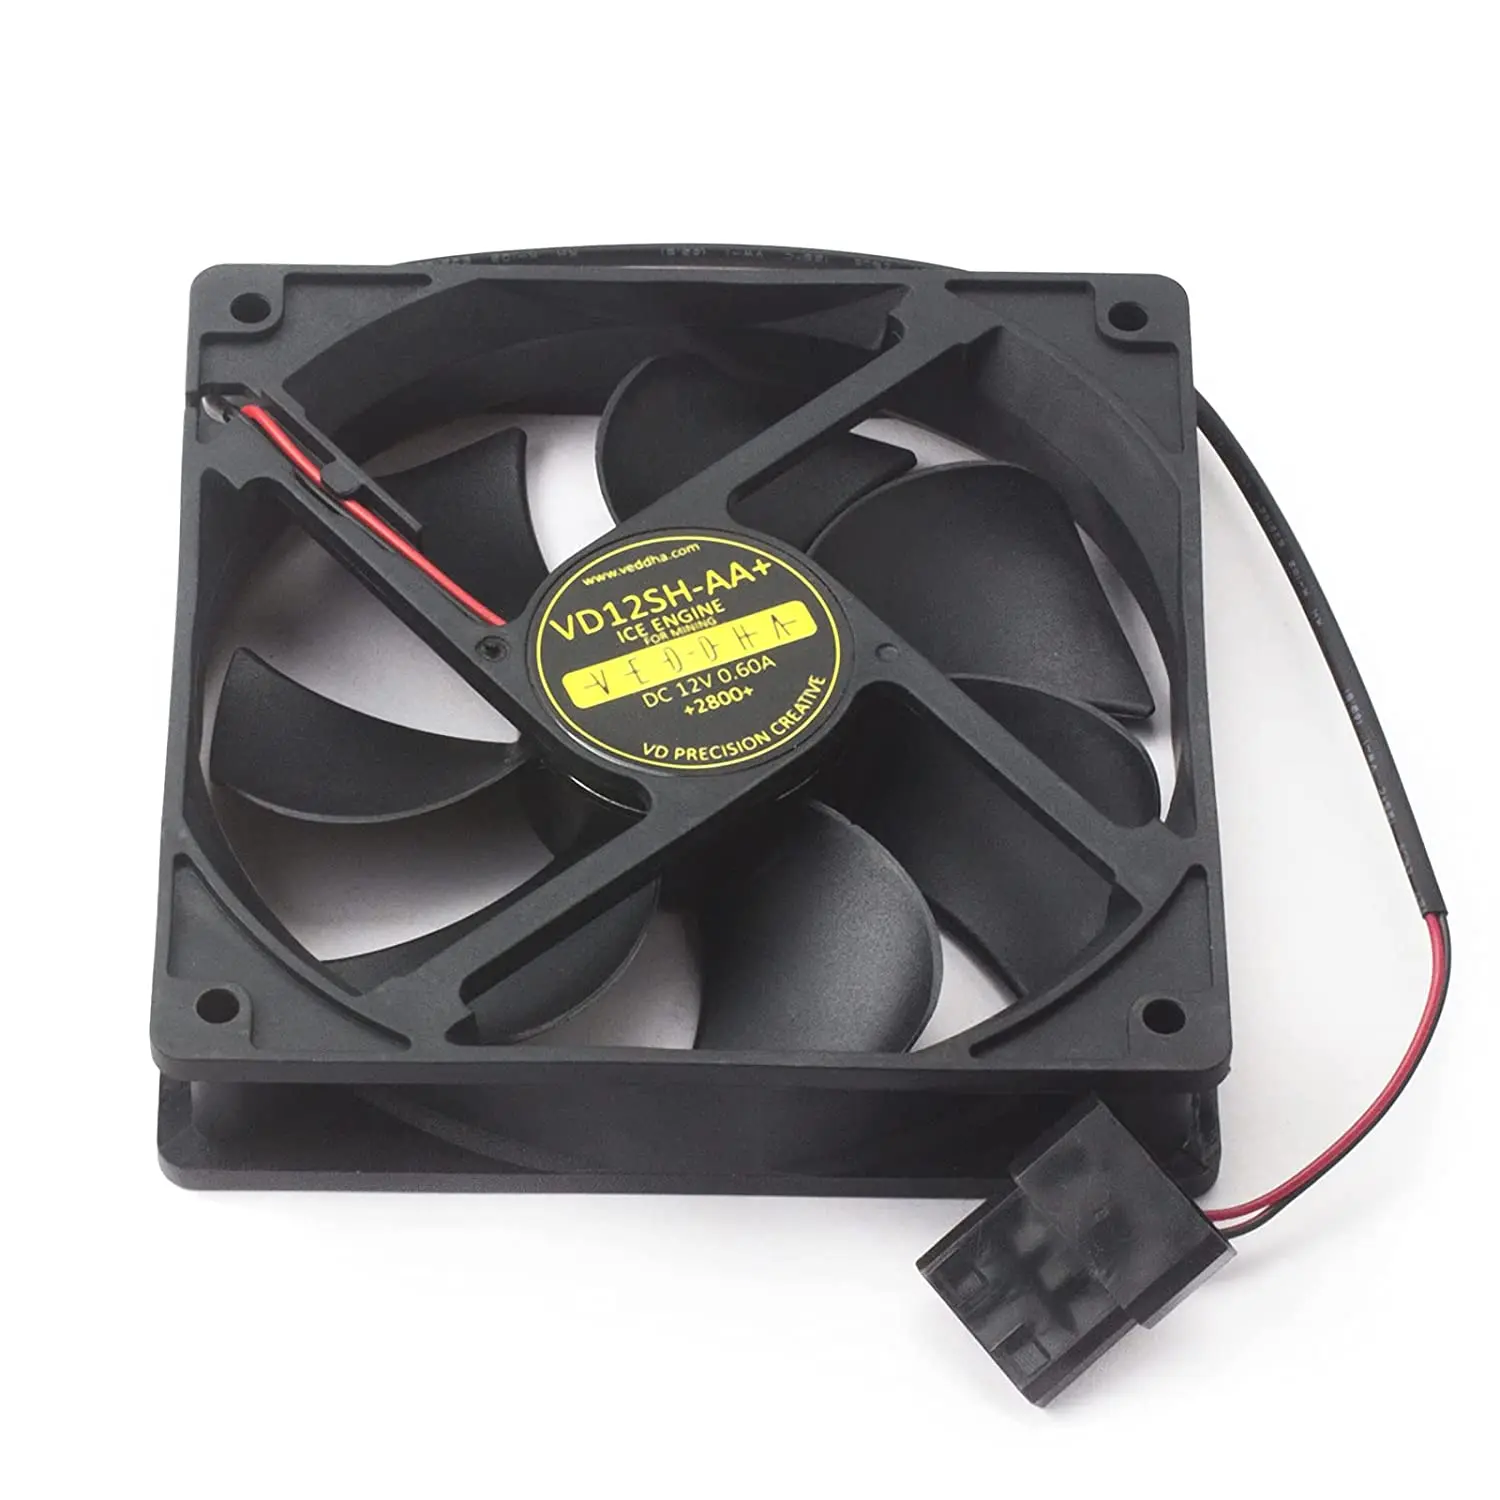 

VEDDHA VD12SH 2800rpm 12cm 120mm 120x120x25mm Cooler PC Brushless DC Silent Cooling Case Fan Black 12V 4 Pin 7 Blades, See picture